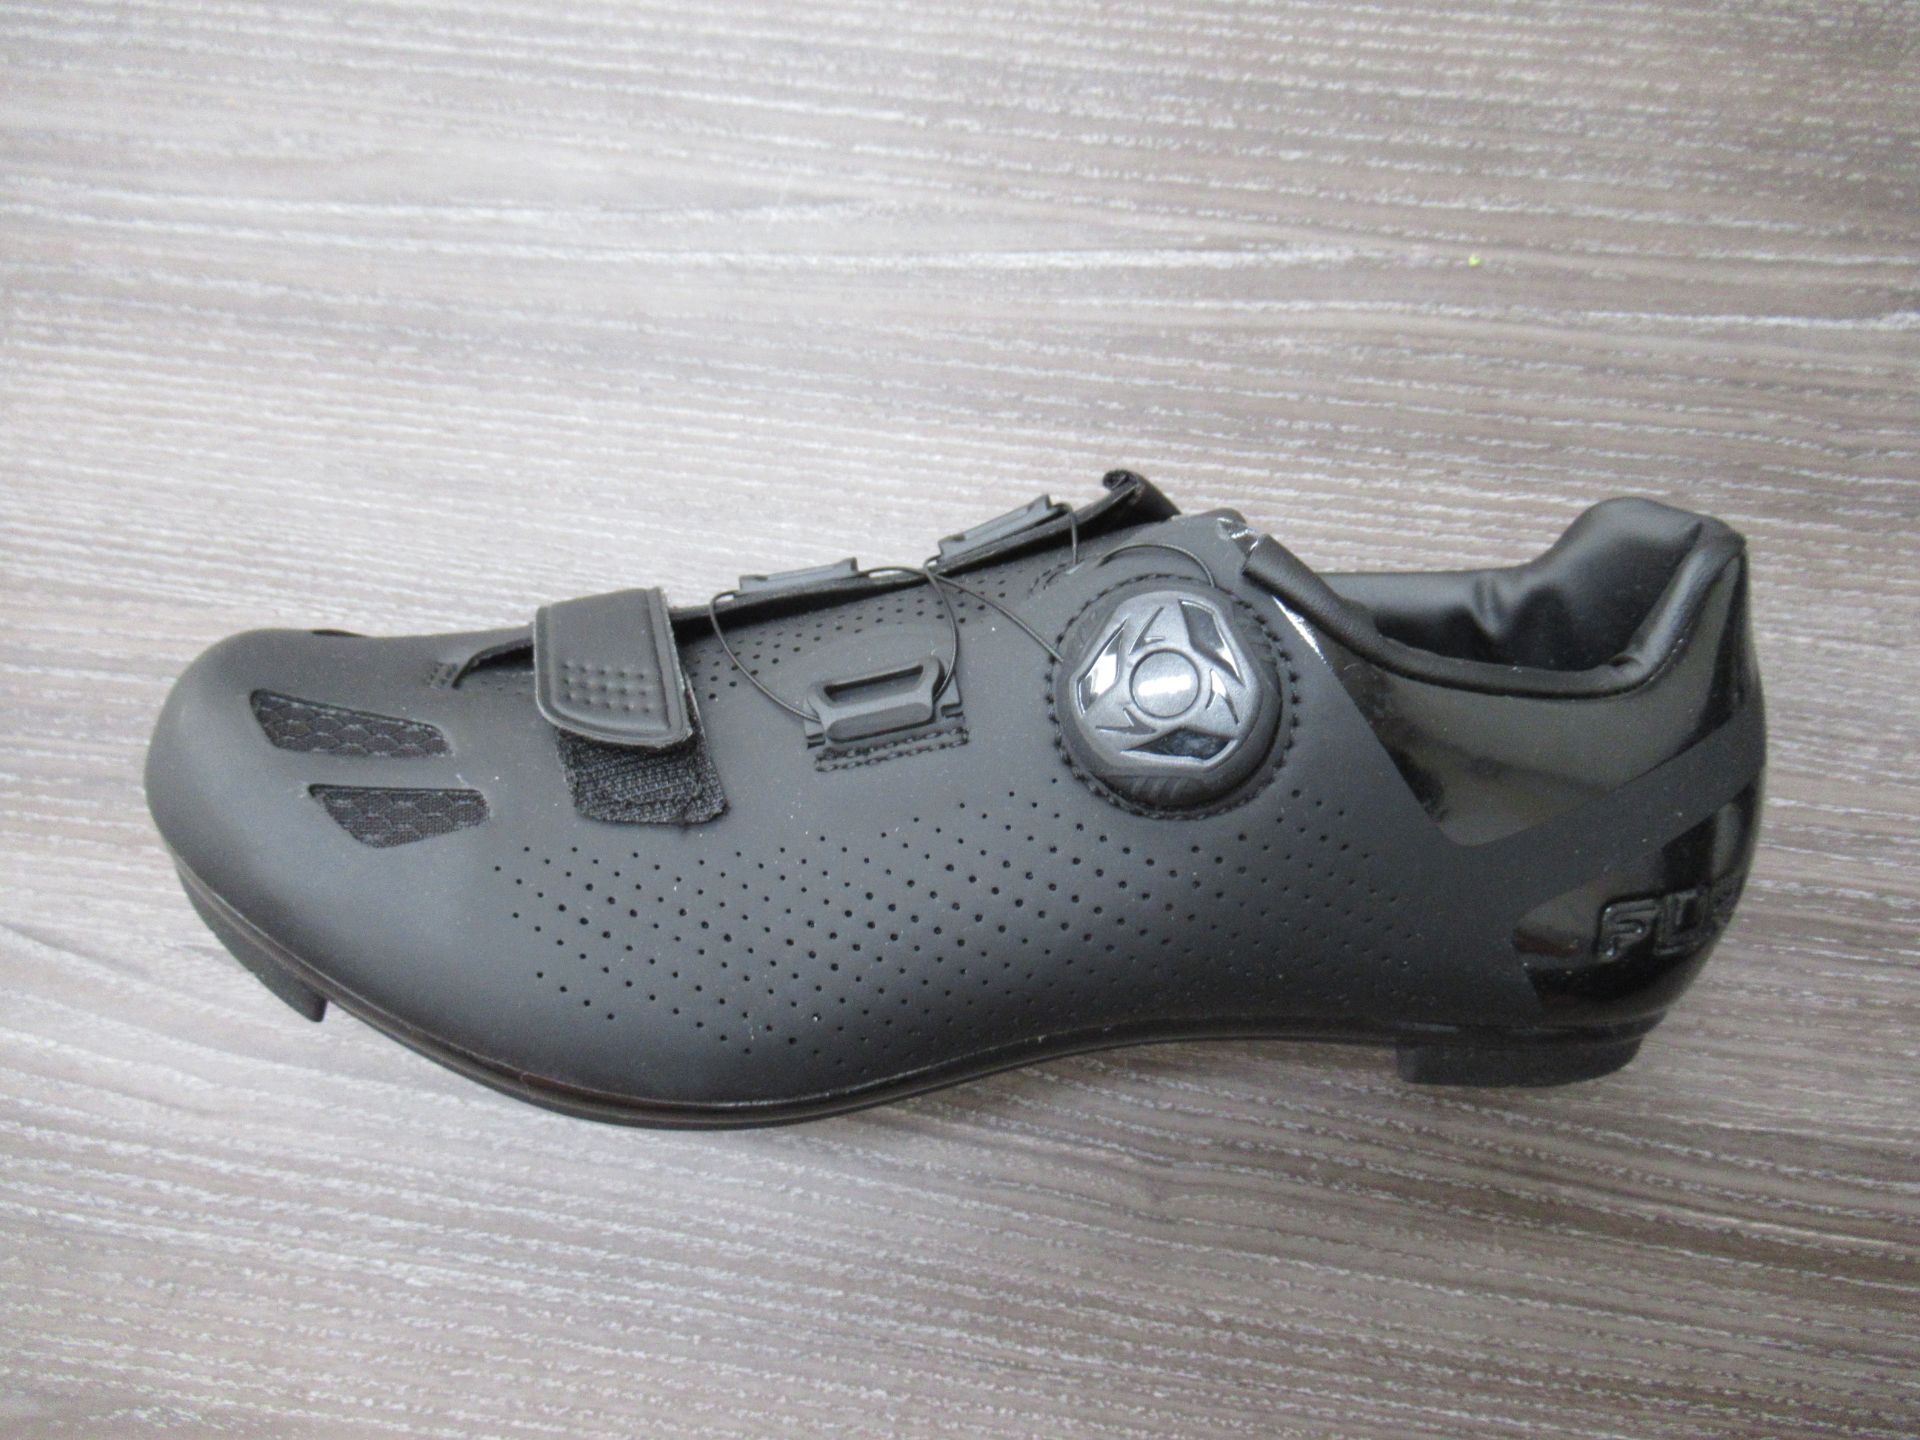 2 x Pairs of FLR cycling shoes - 1 x F-11 boxed EU size 39 (RRP£99.99) and 1 x F-35 III boxed EU siz - Image 7 of 7